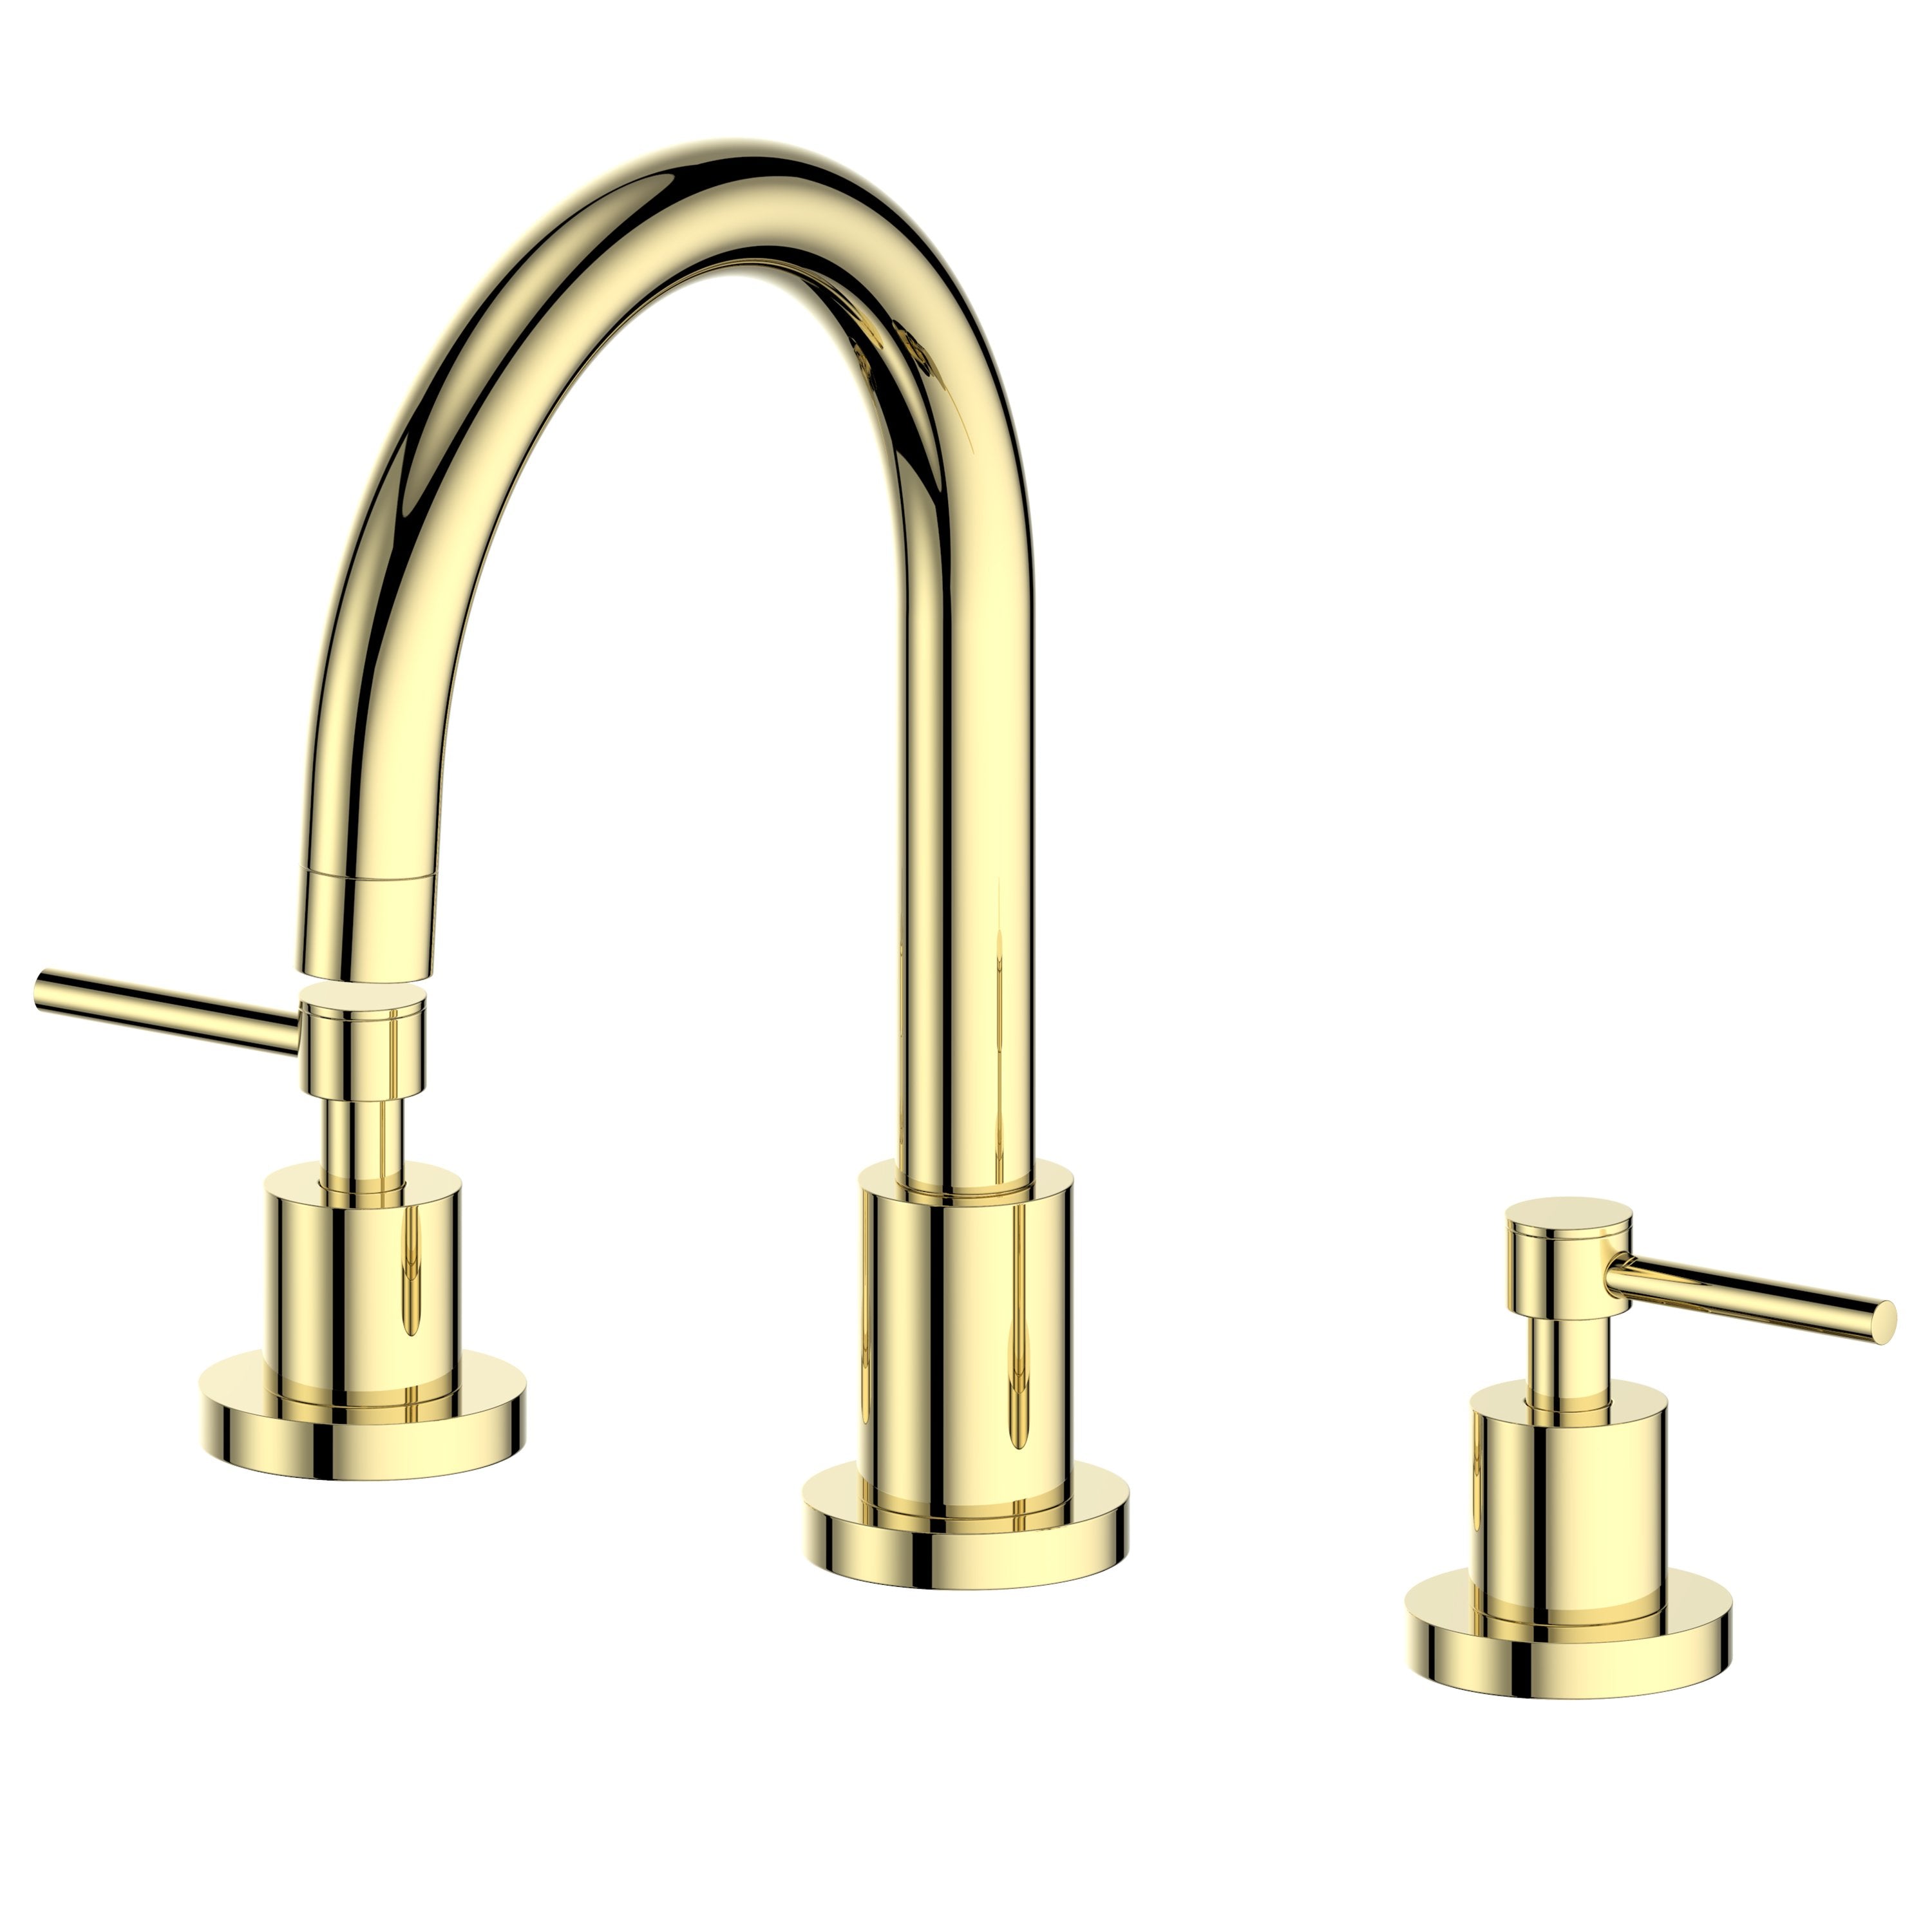 Therangehoodstore.com, ZLINE Emerald Bay Bath Faucet With Color Options, EMBY-BF-PG,